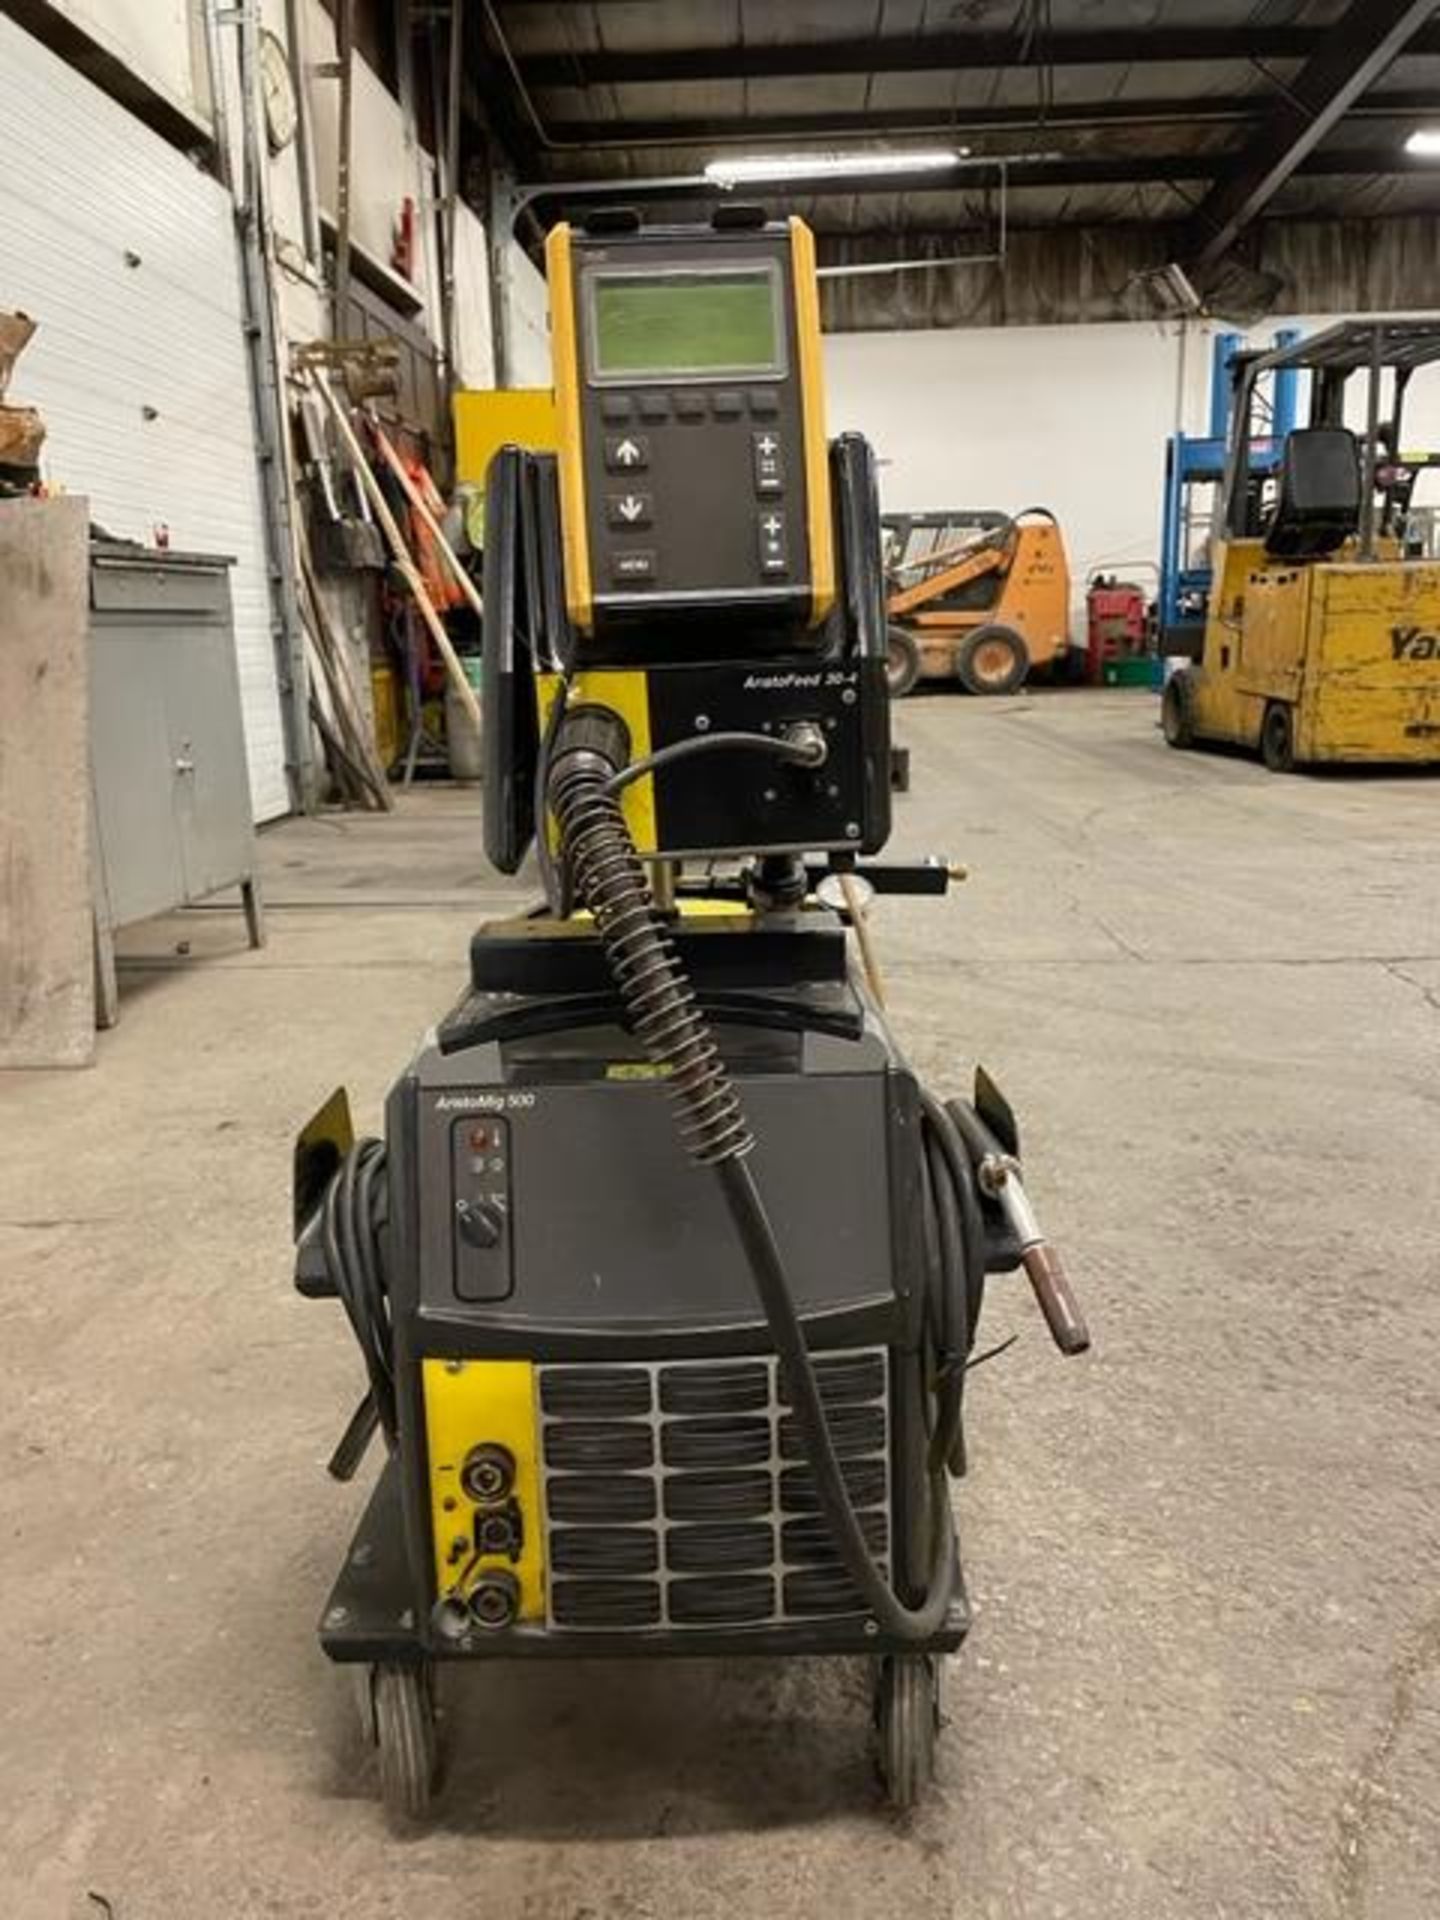 Esab AristoMig 500 Mig Welder Complete with Wire Feeder and Mig gun - 500 amp unit with remote - Image 2 of 2